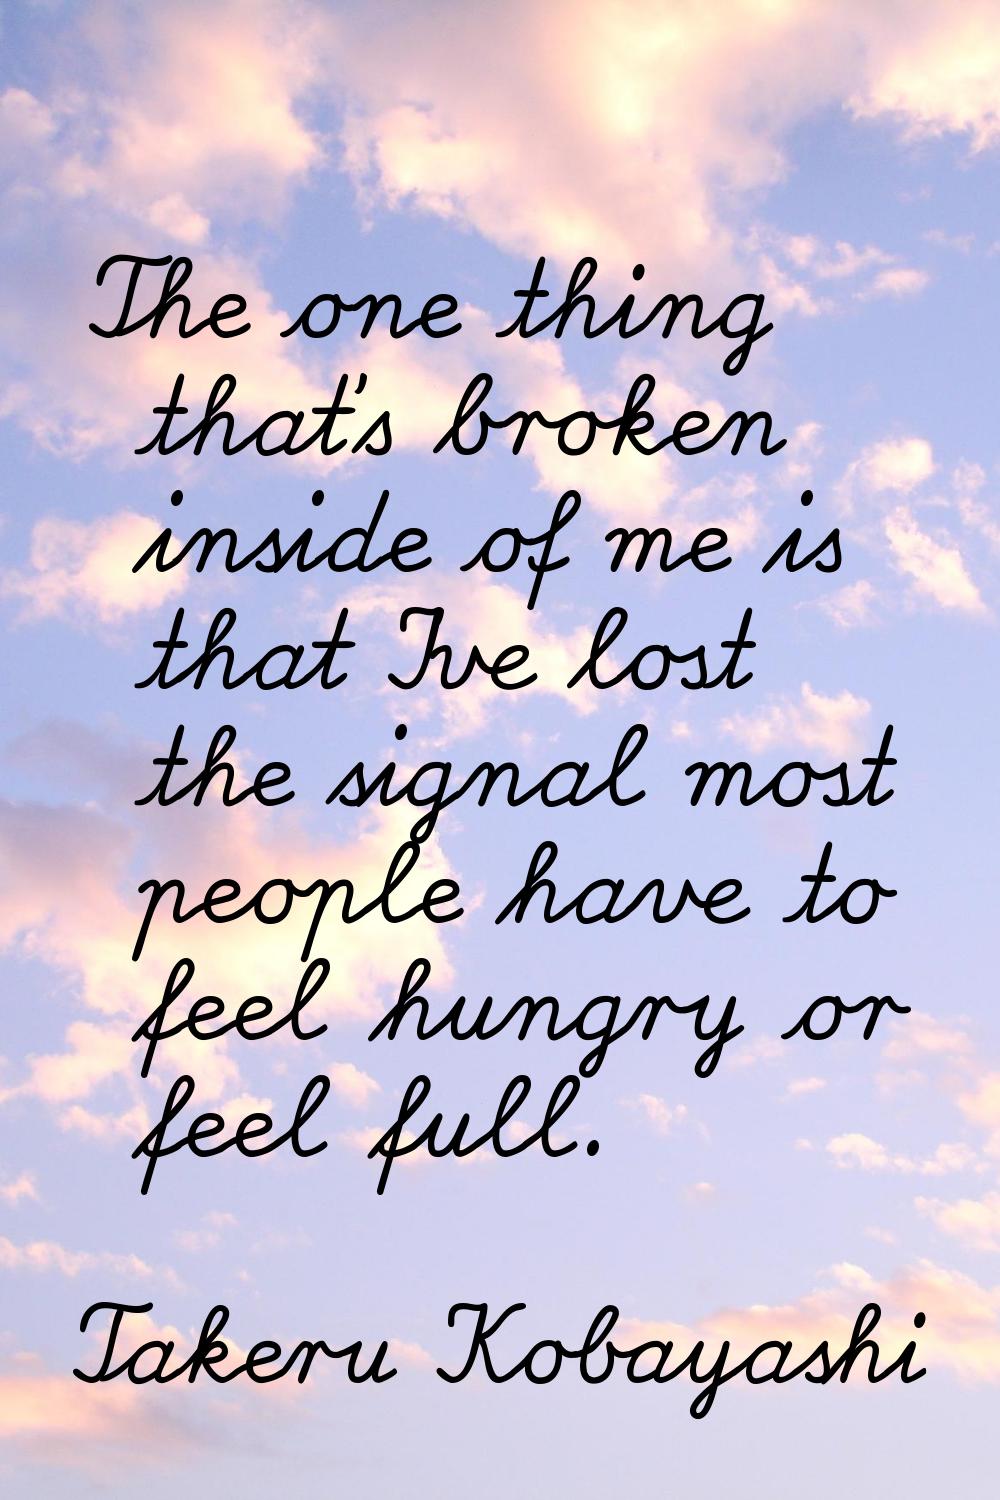 The one thing that's broken inside of me is that I've lost the signal most people have to feel hung